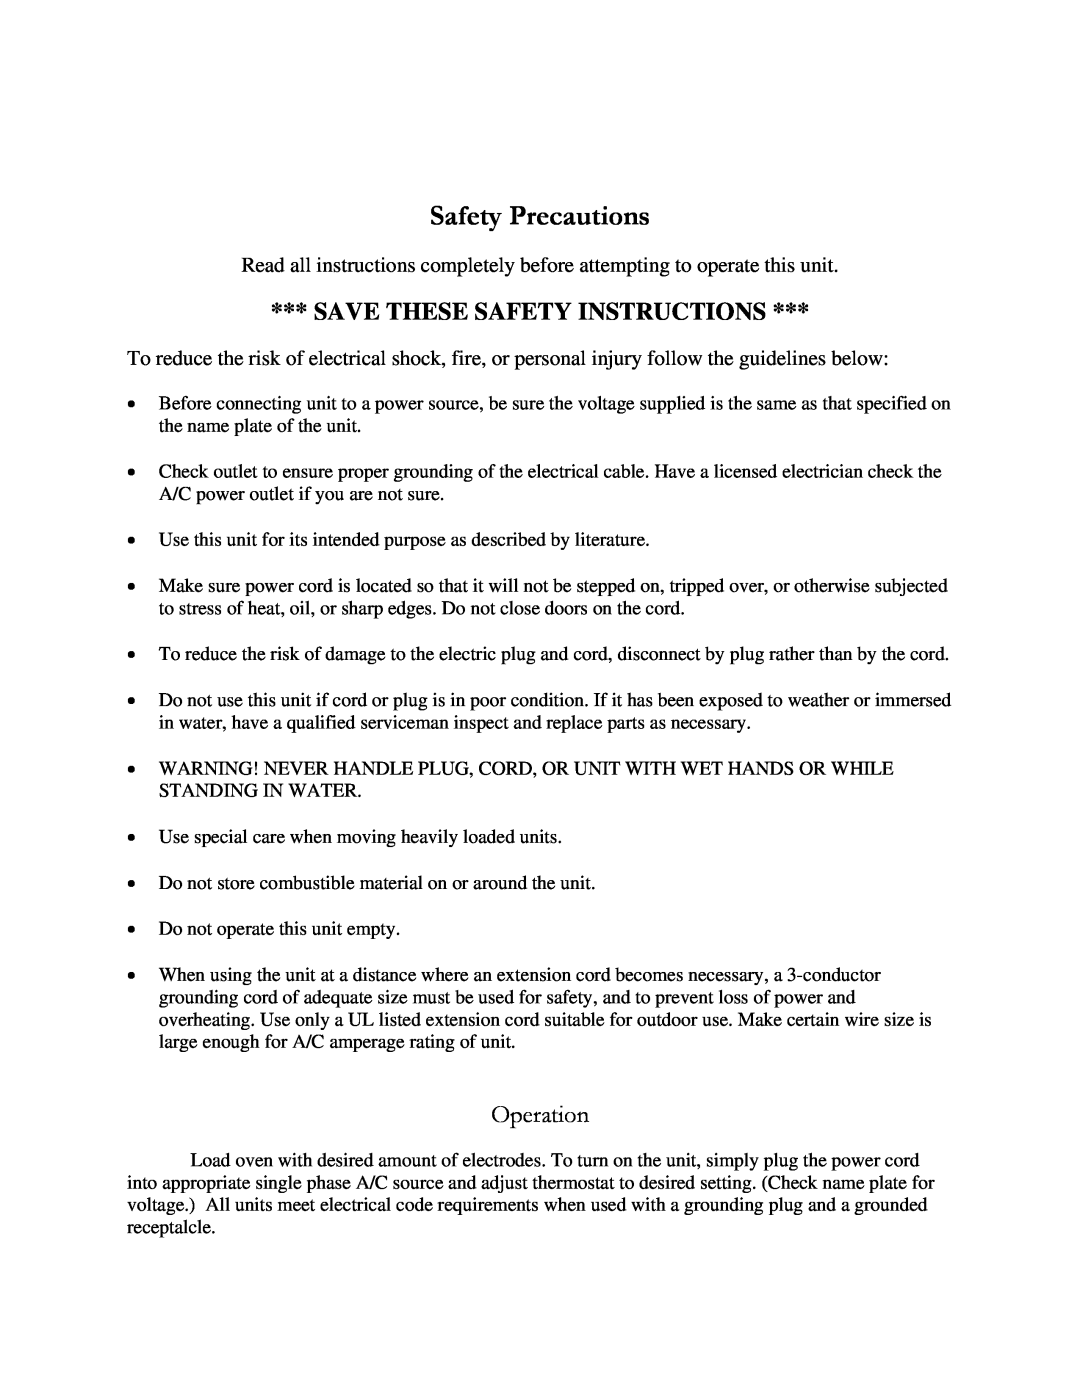 Henkel K-360-36 manual Safety Precautions, Operation, Save These Safety Instructions 